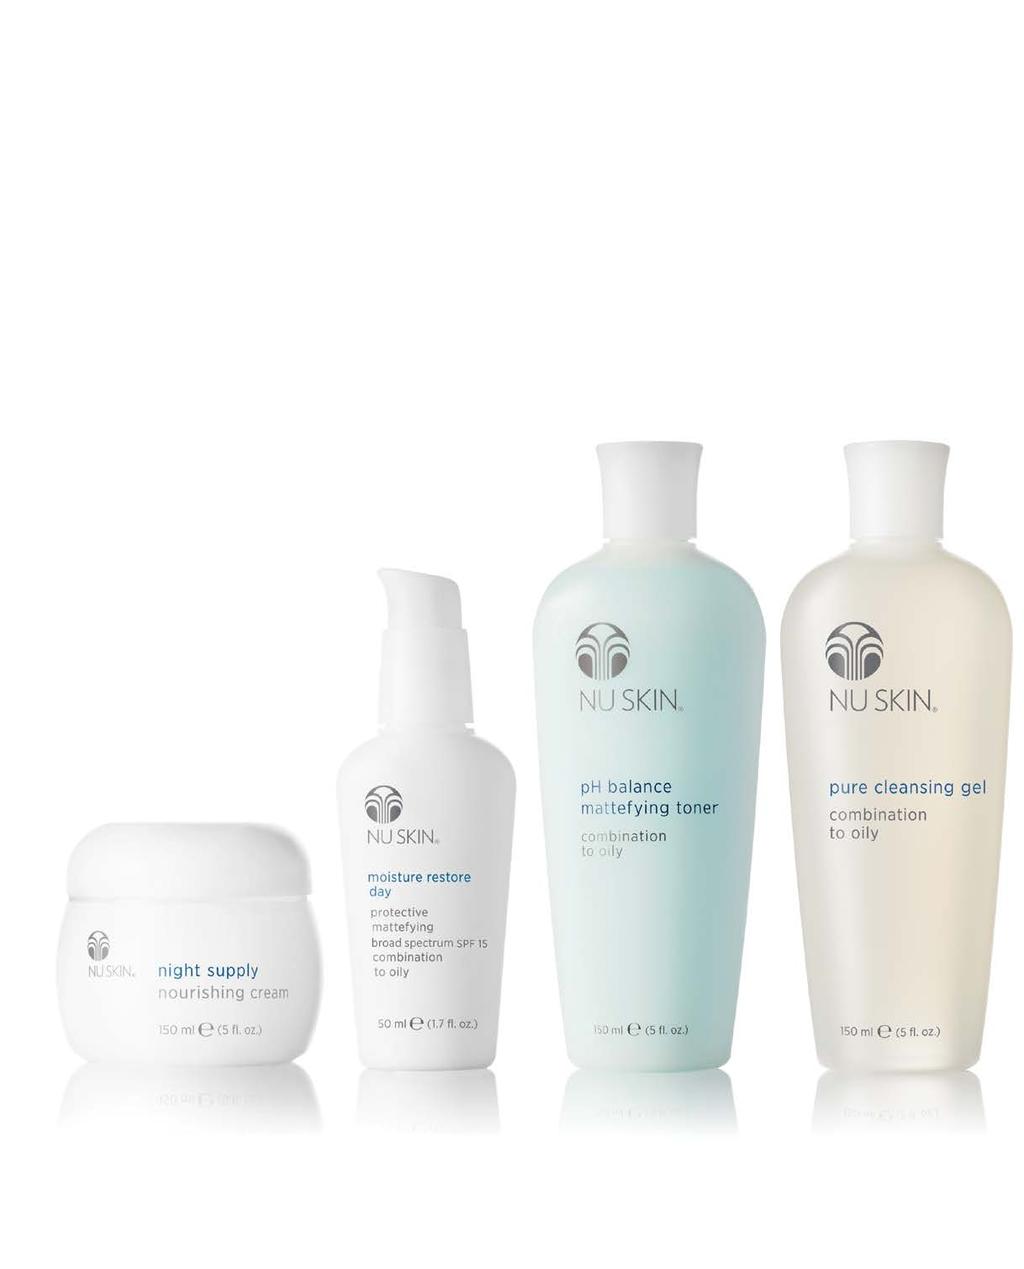 25 COMBINATION TO OILY PURE CLEANSING GEL 01 110309 $15 PH BALANCE MATTEFYING TONER 01 110313 $13.